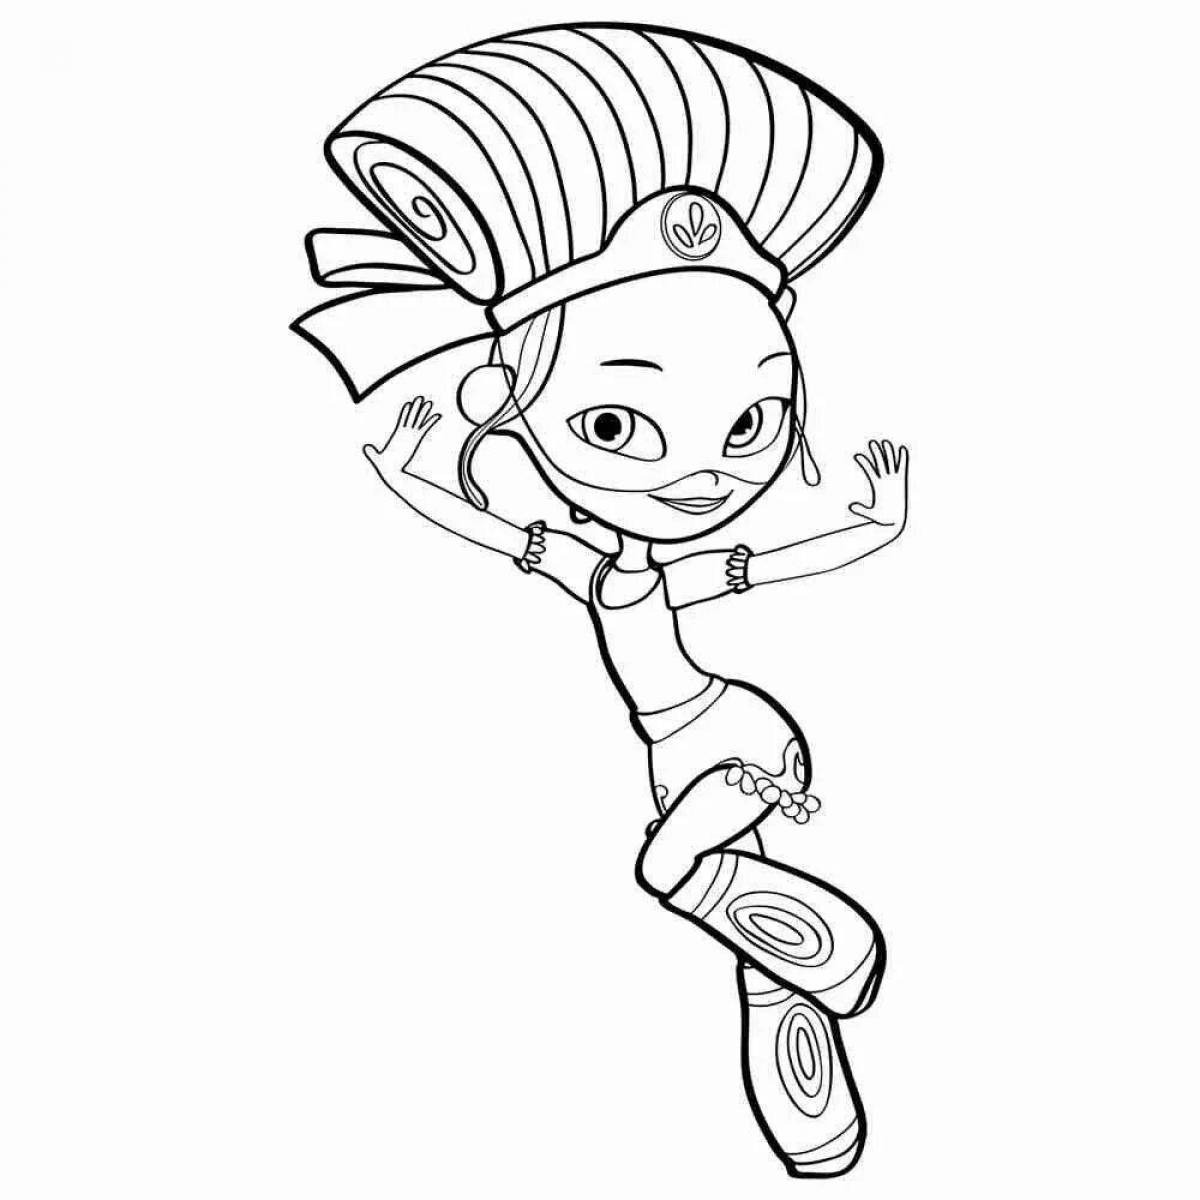 Color-frenzy alenka coloring page